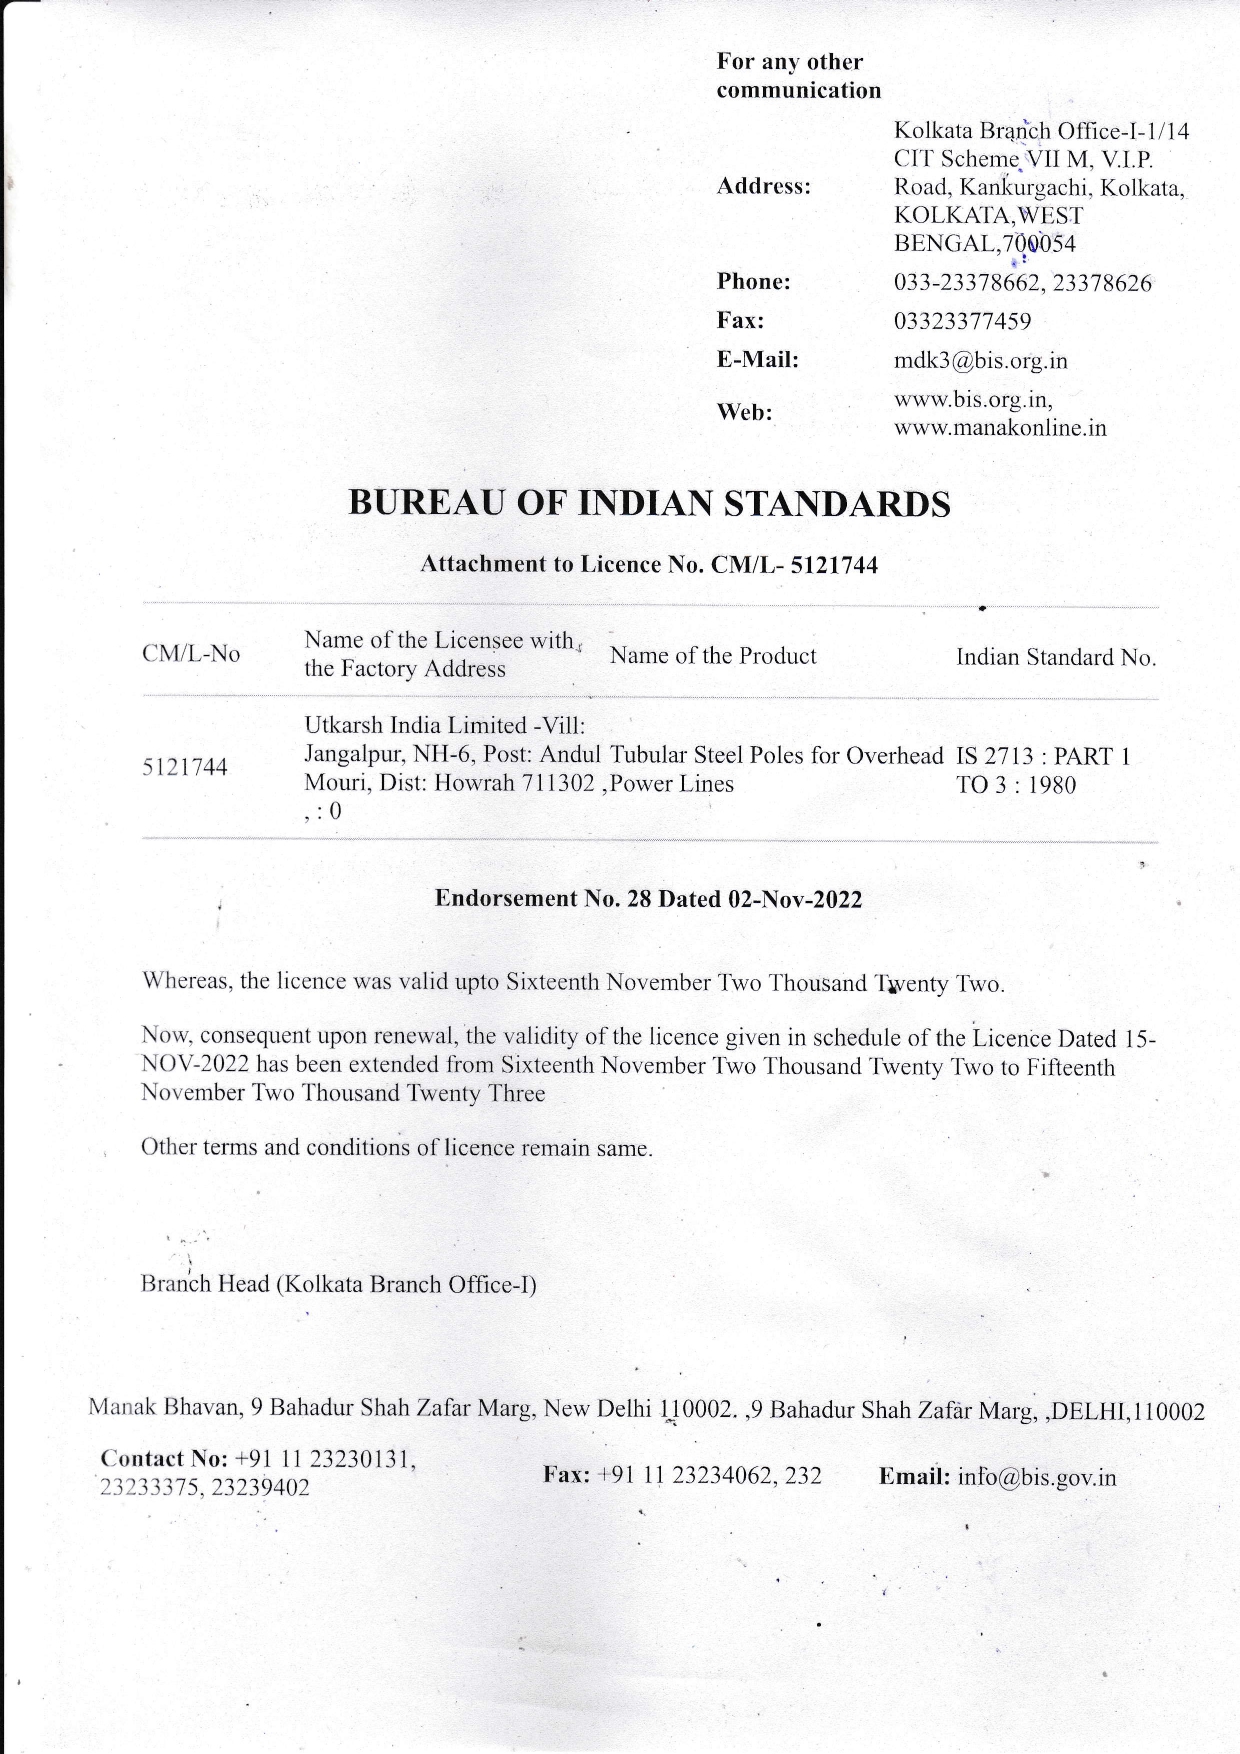 Bureau of Indian Standards IS 2713 PART 1 TO 3  1980